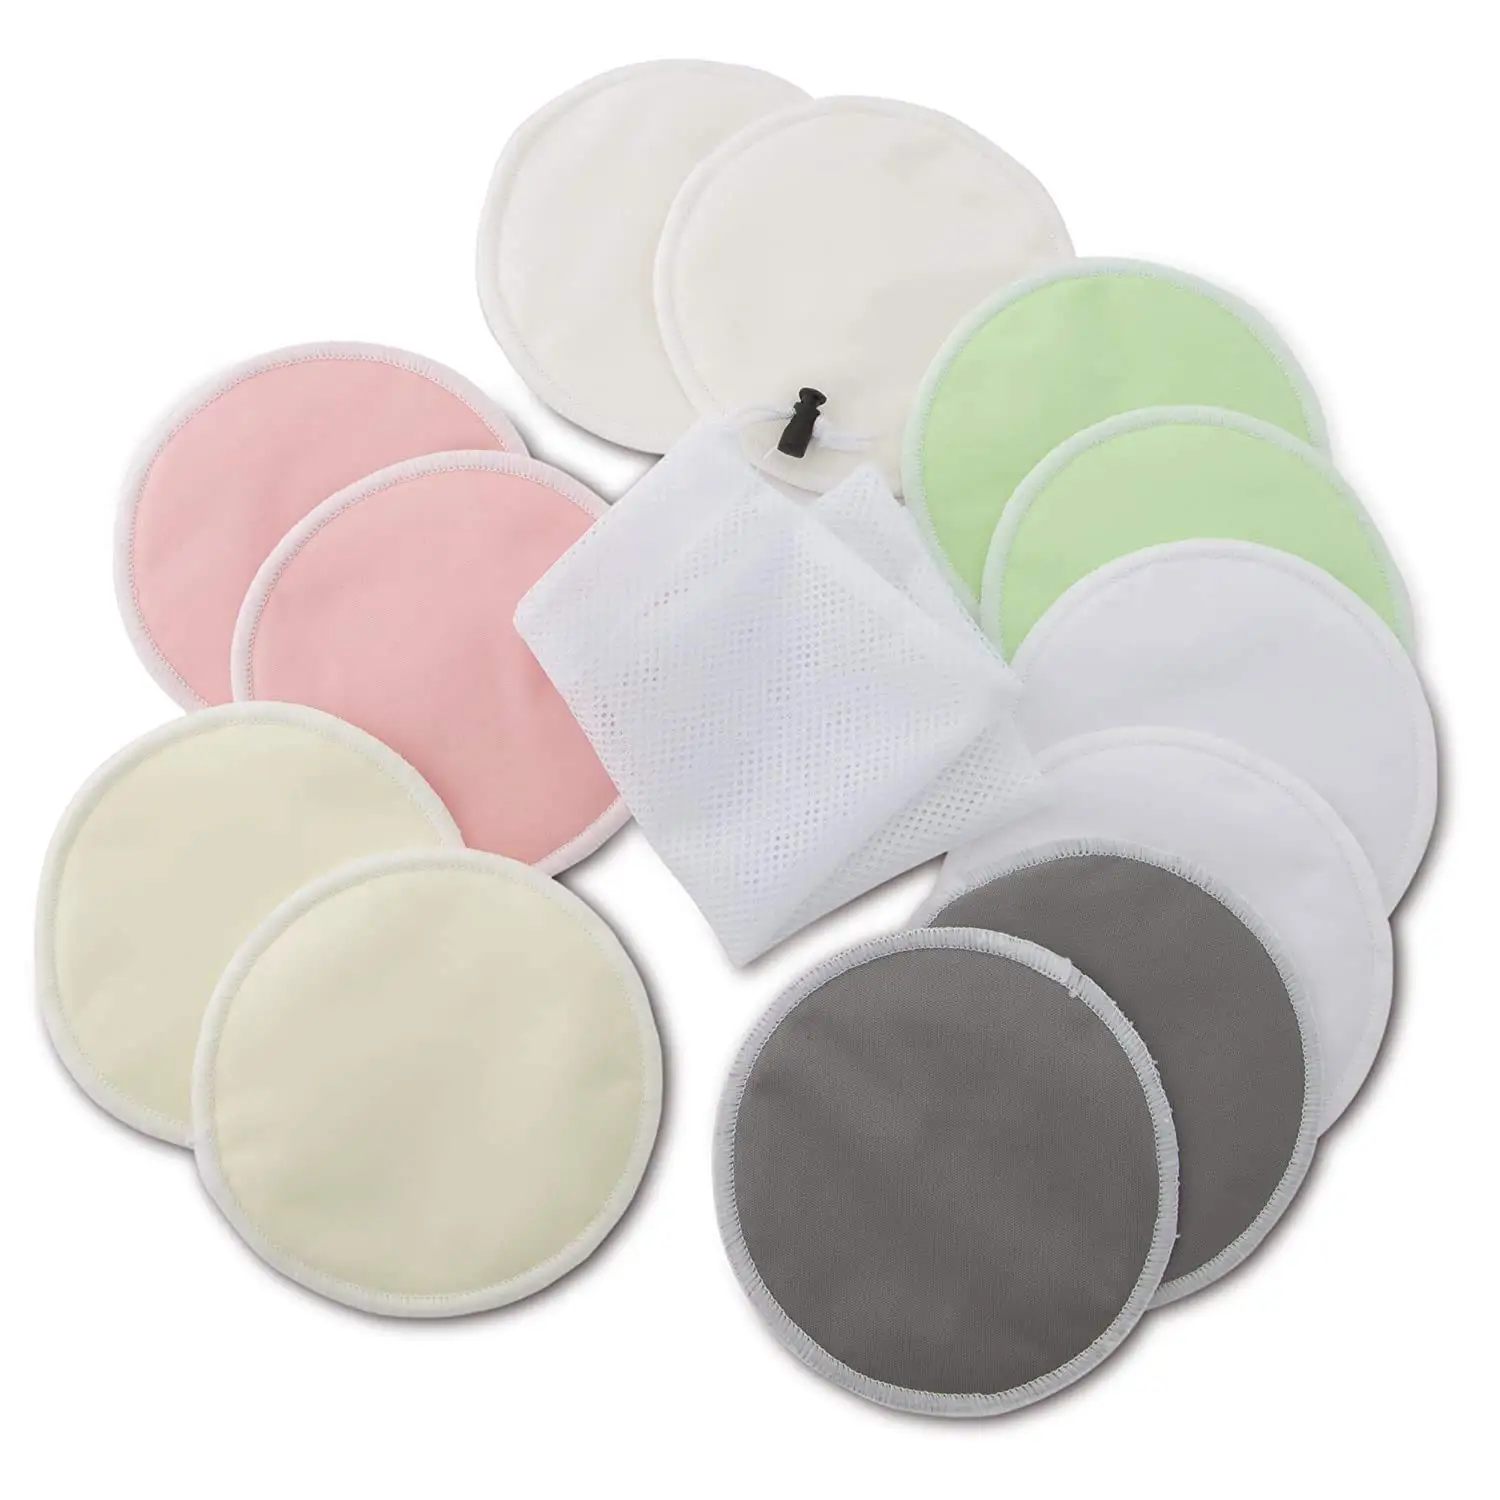 

Colorful Printed Washable breast pads Organic bamboo nursing pads Reusable Spill-proof Breast Feeding Pads, Picture shown